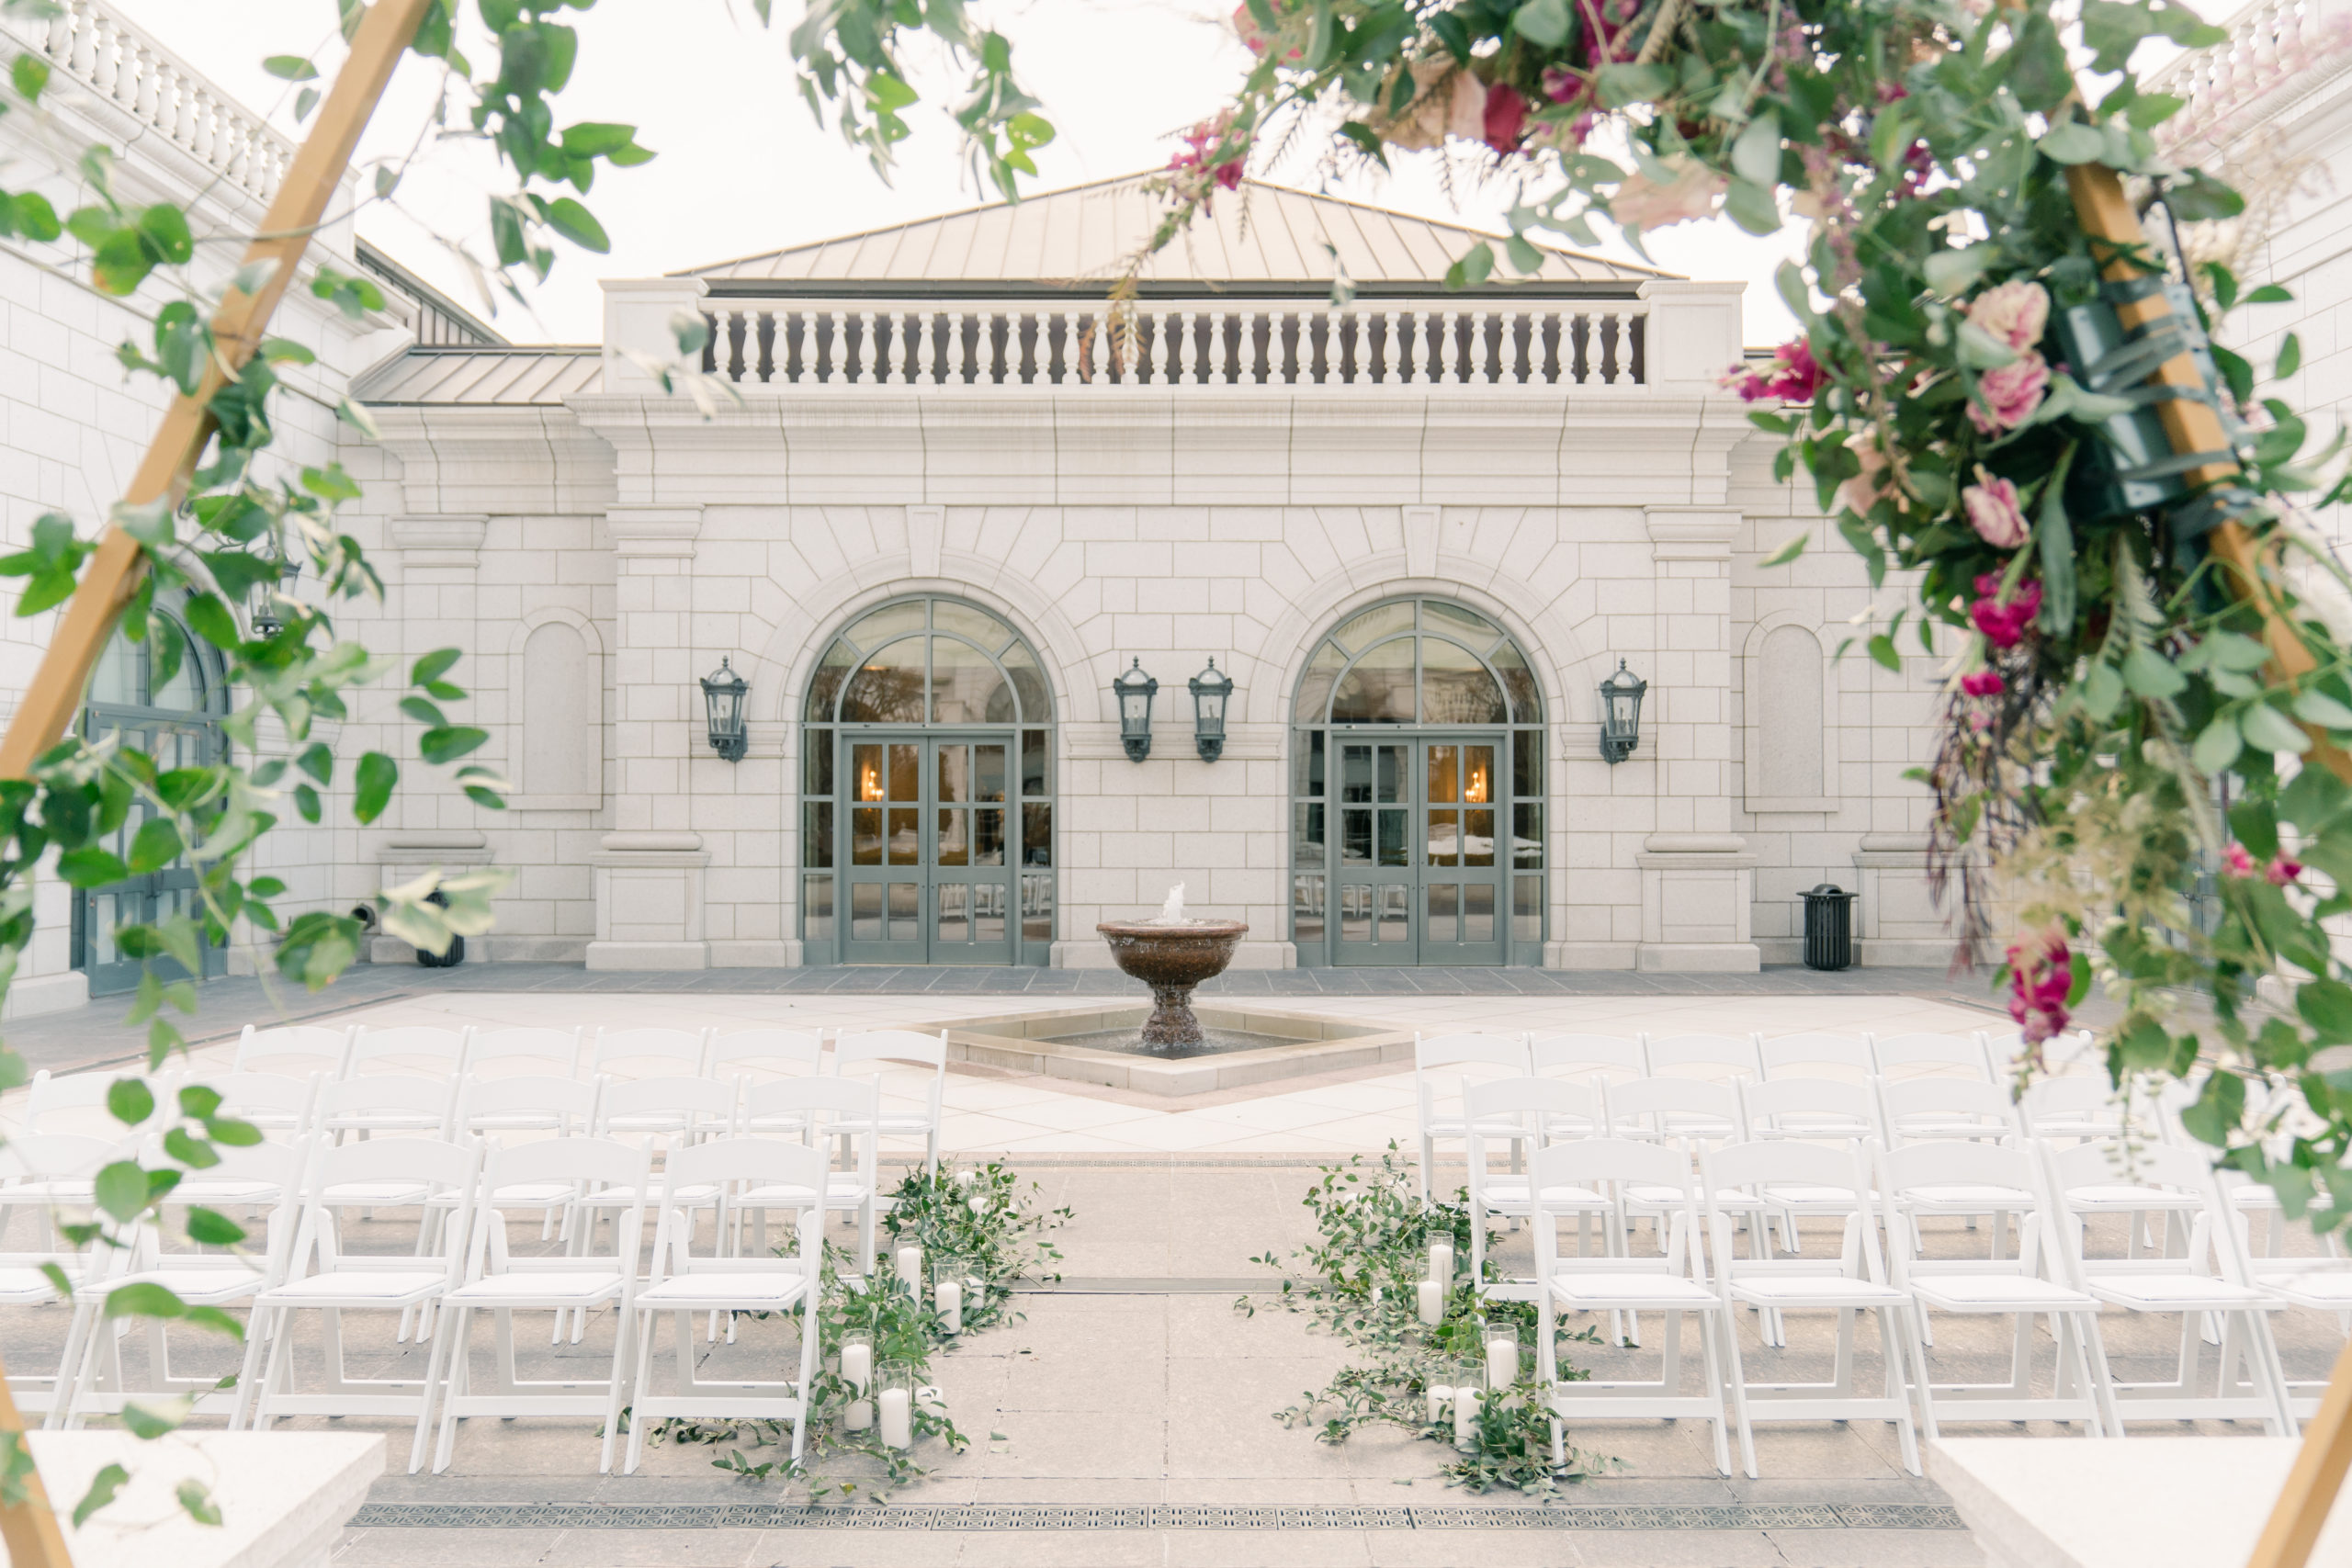 Outdoor wedding ceremony set up with white chairs and greenery in the courtyard.